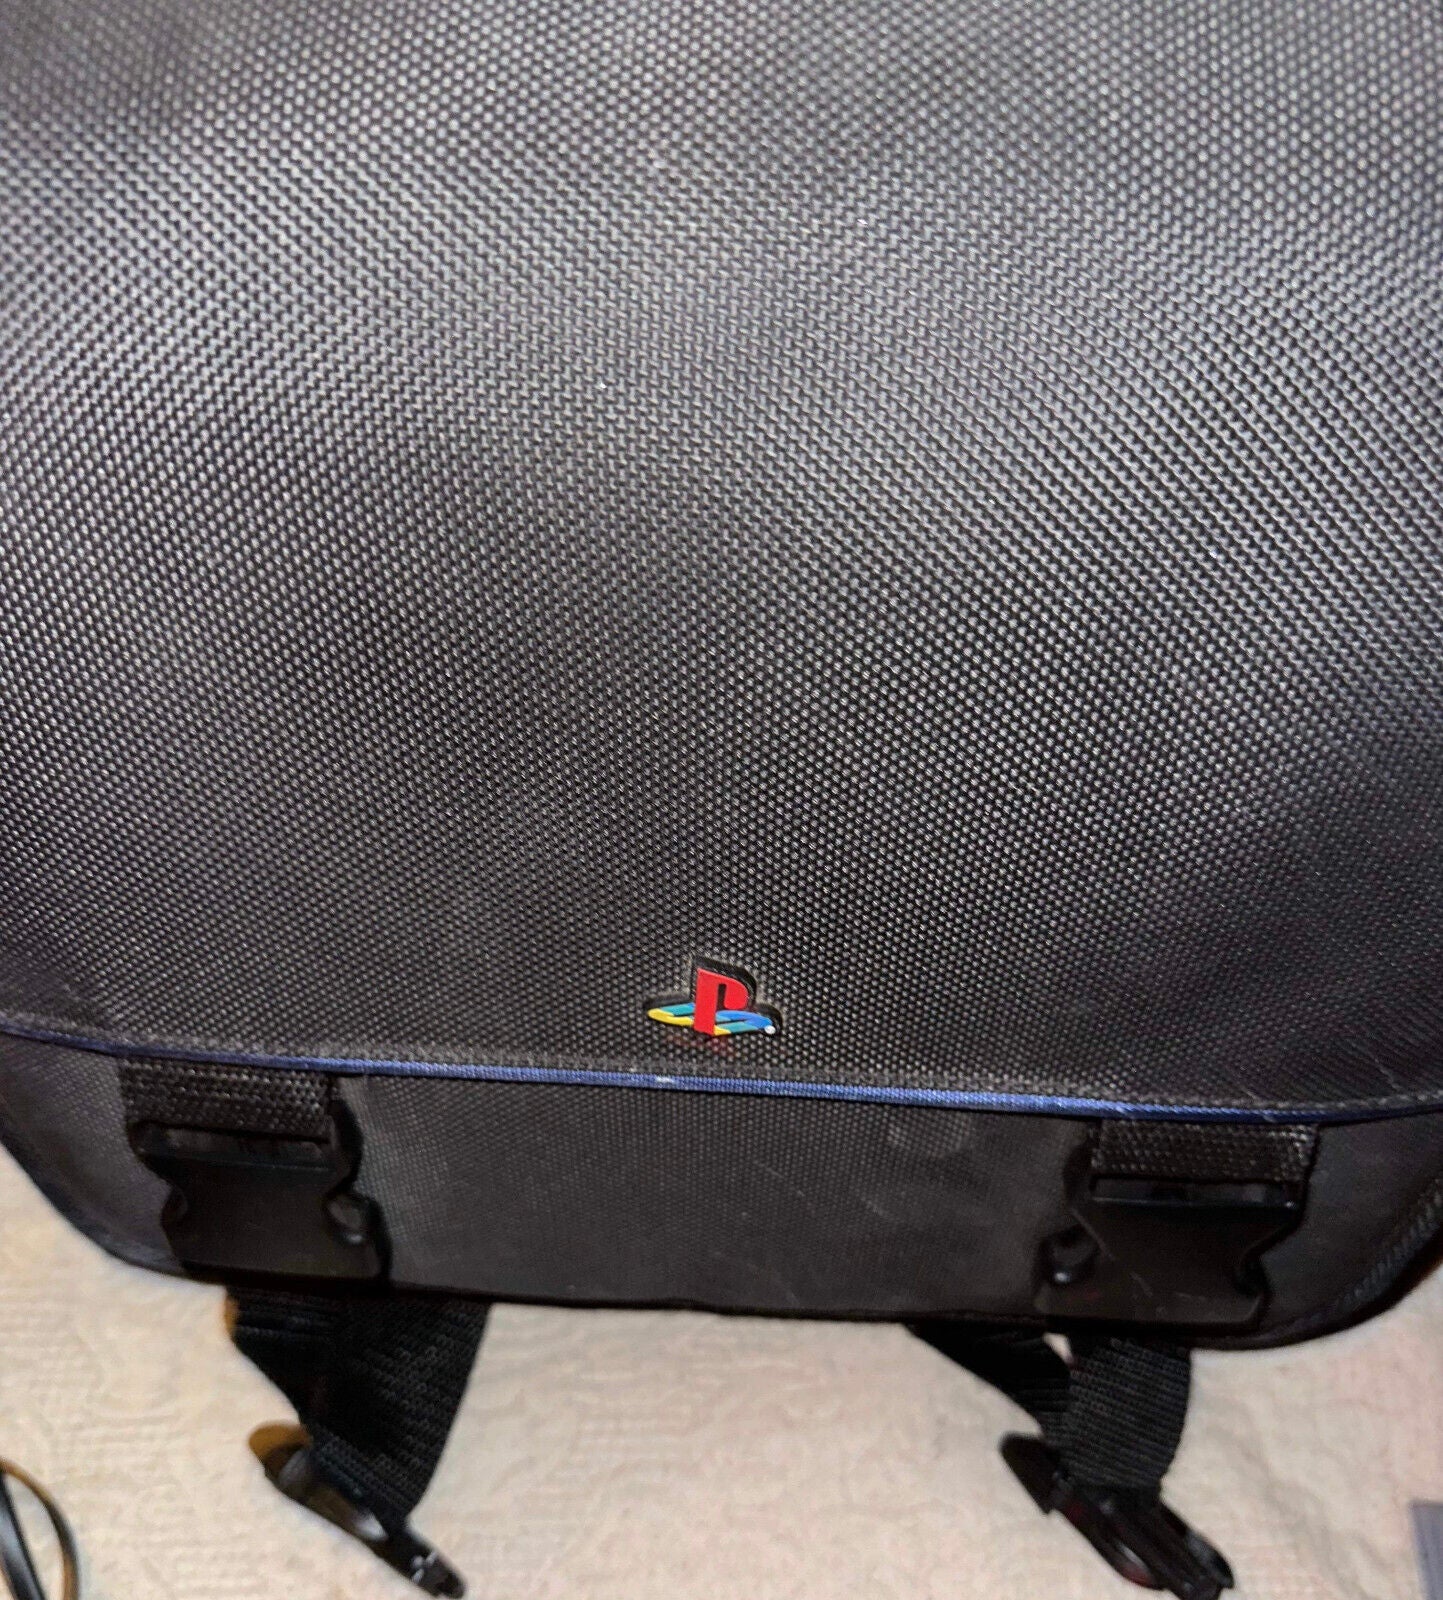 PS2 - Playstation 2 Console w 2 Controllers / Accessories / Game Bag